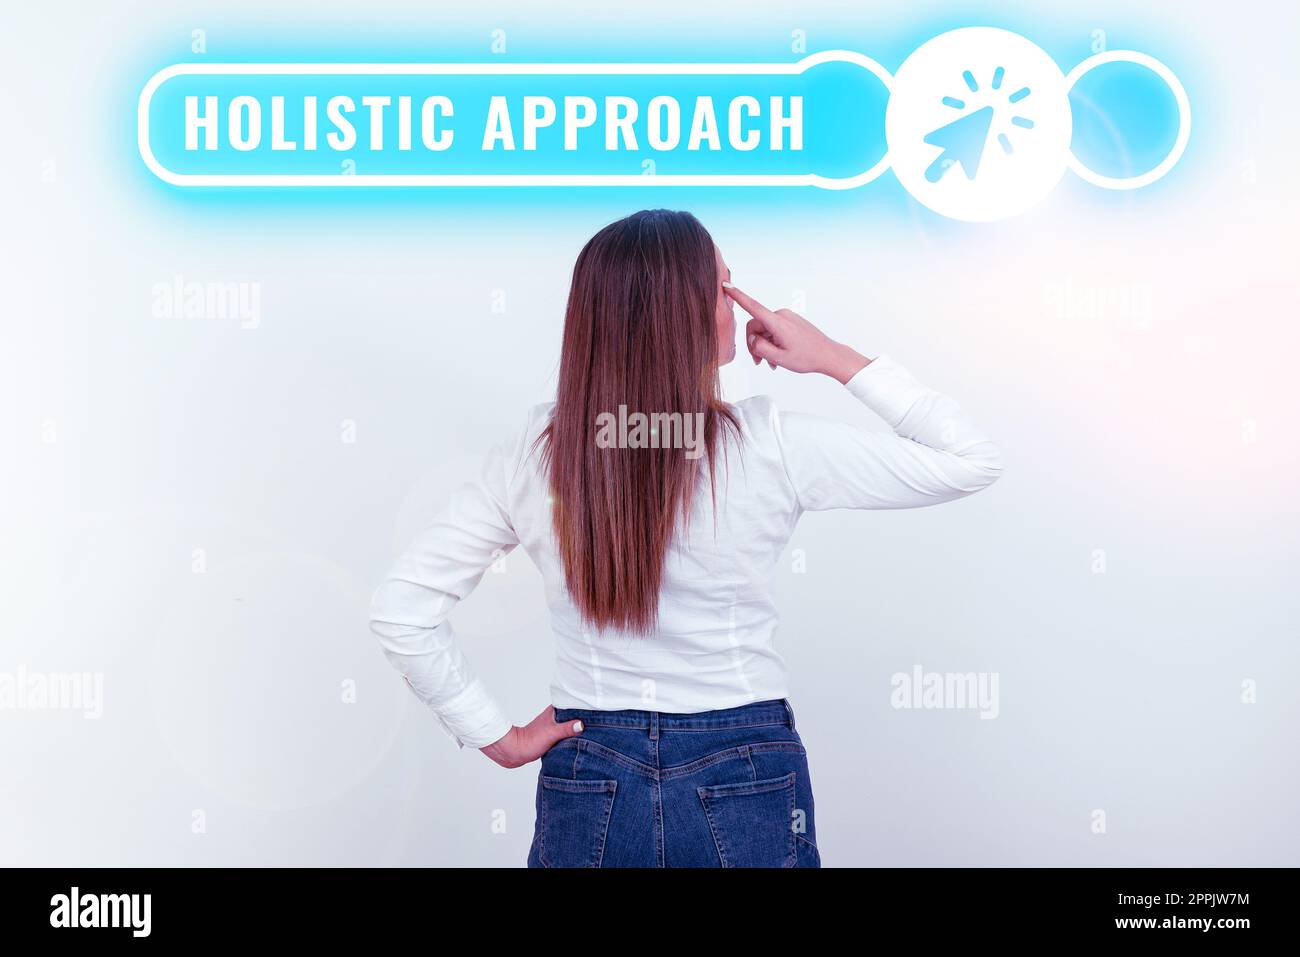 Text showing inspiration Holistic Approach. Business overview characterized belief that parts something intimately interconnected Stock Photo